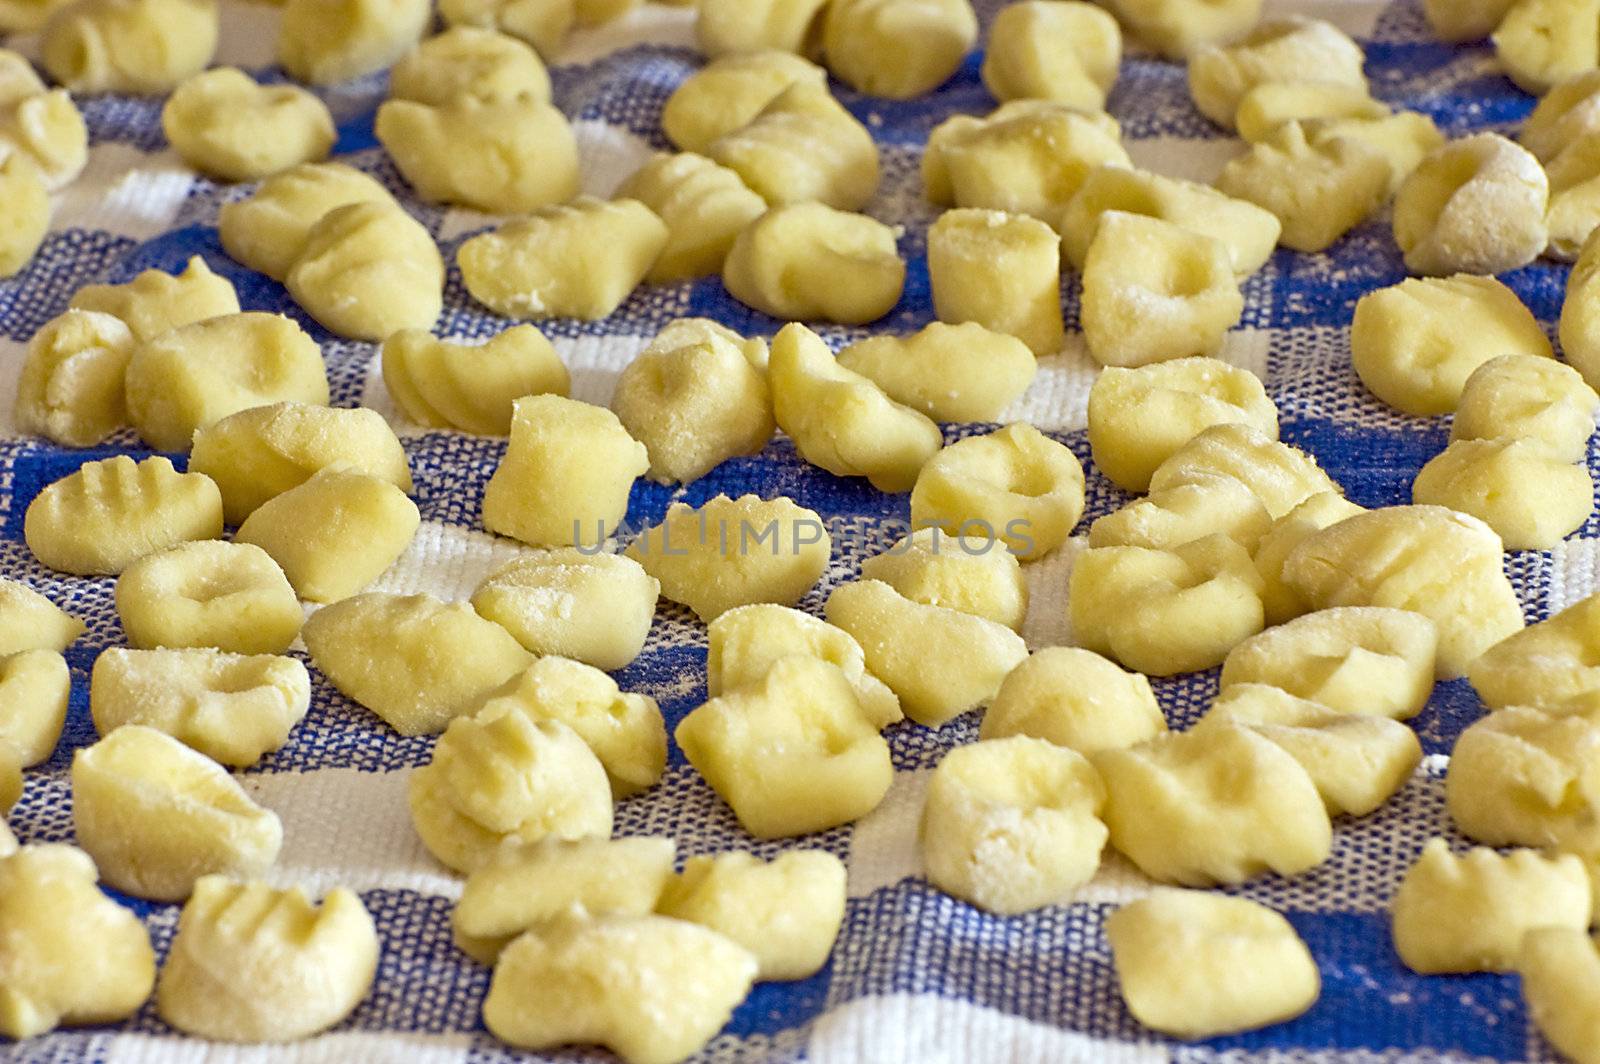 Handmade dumplings on a squared cloth ready to cooking